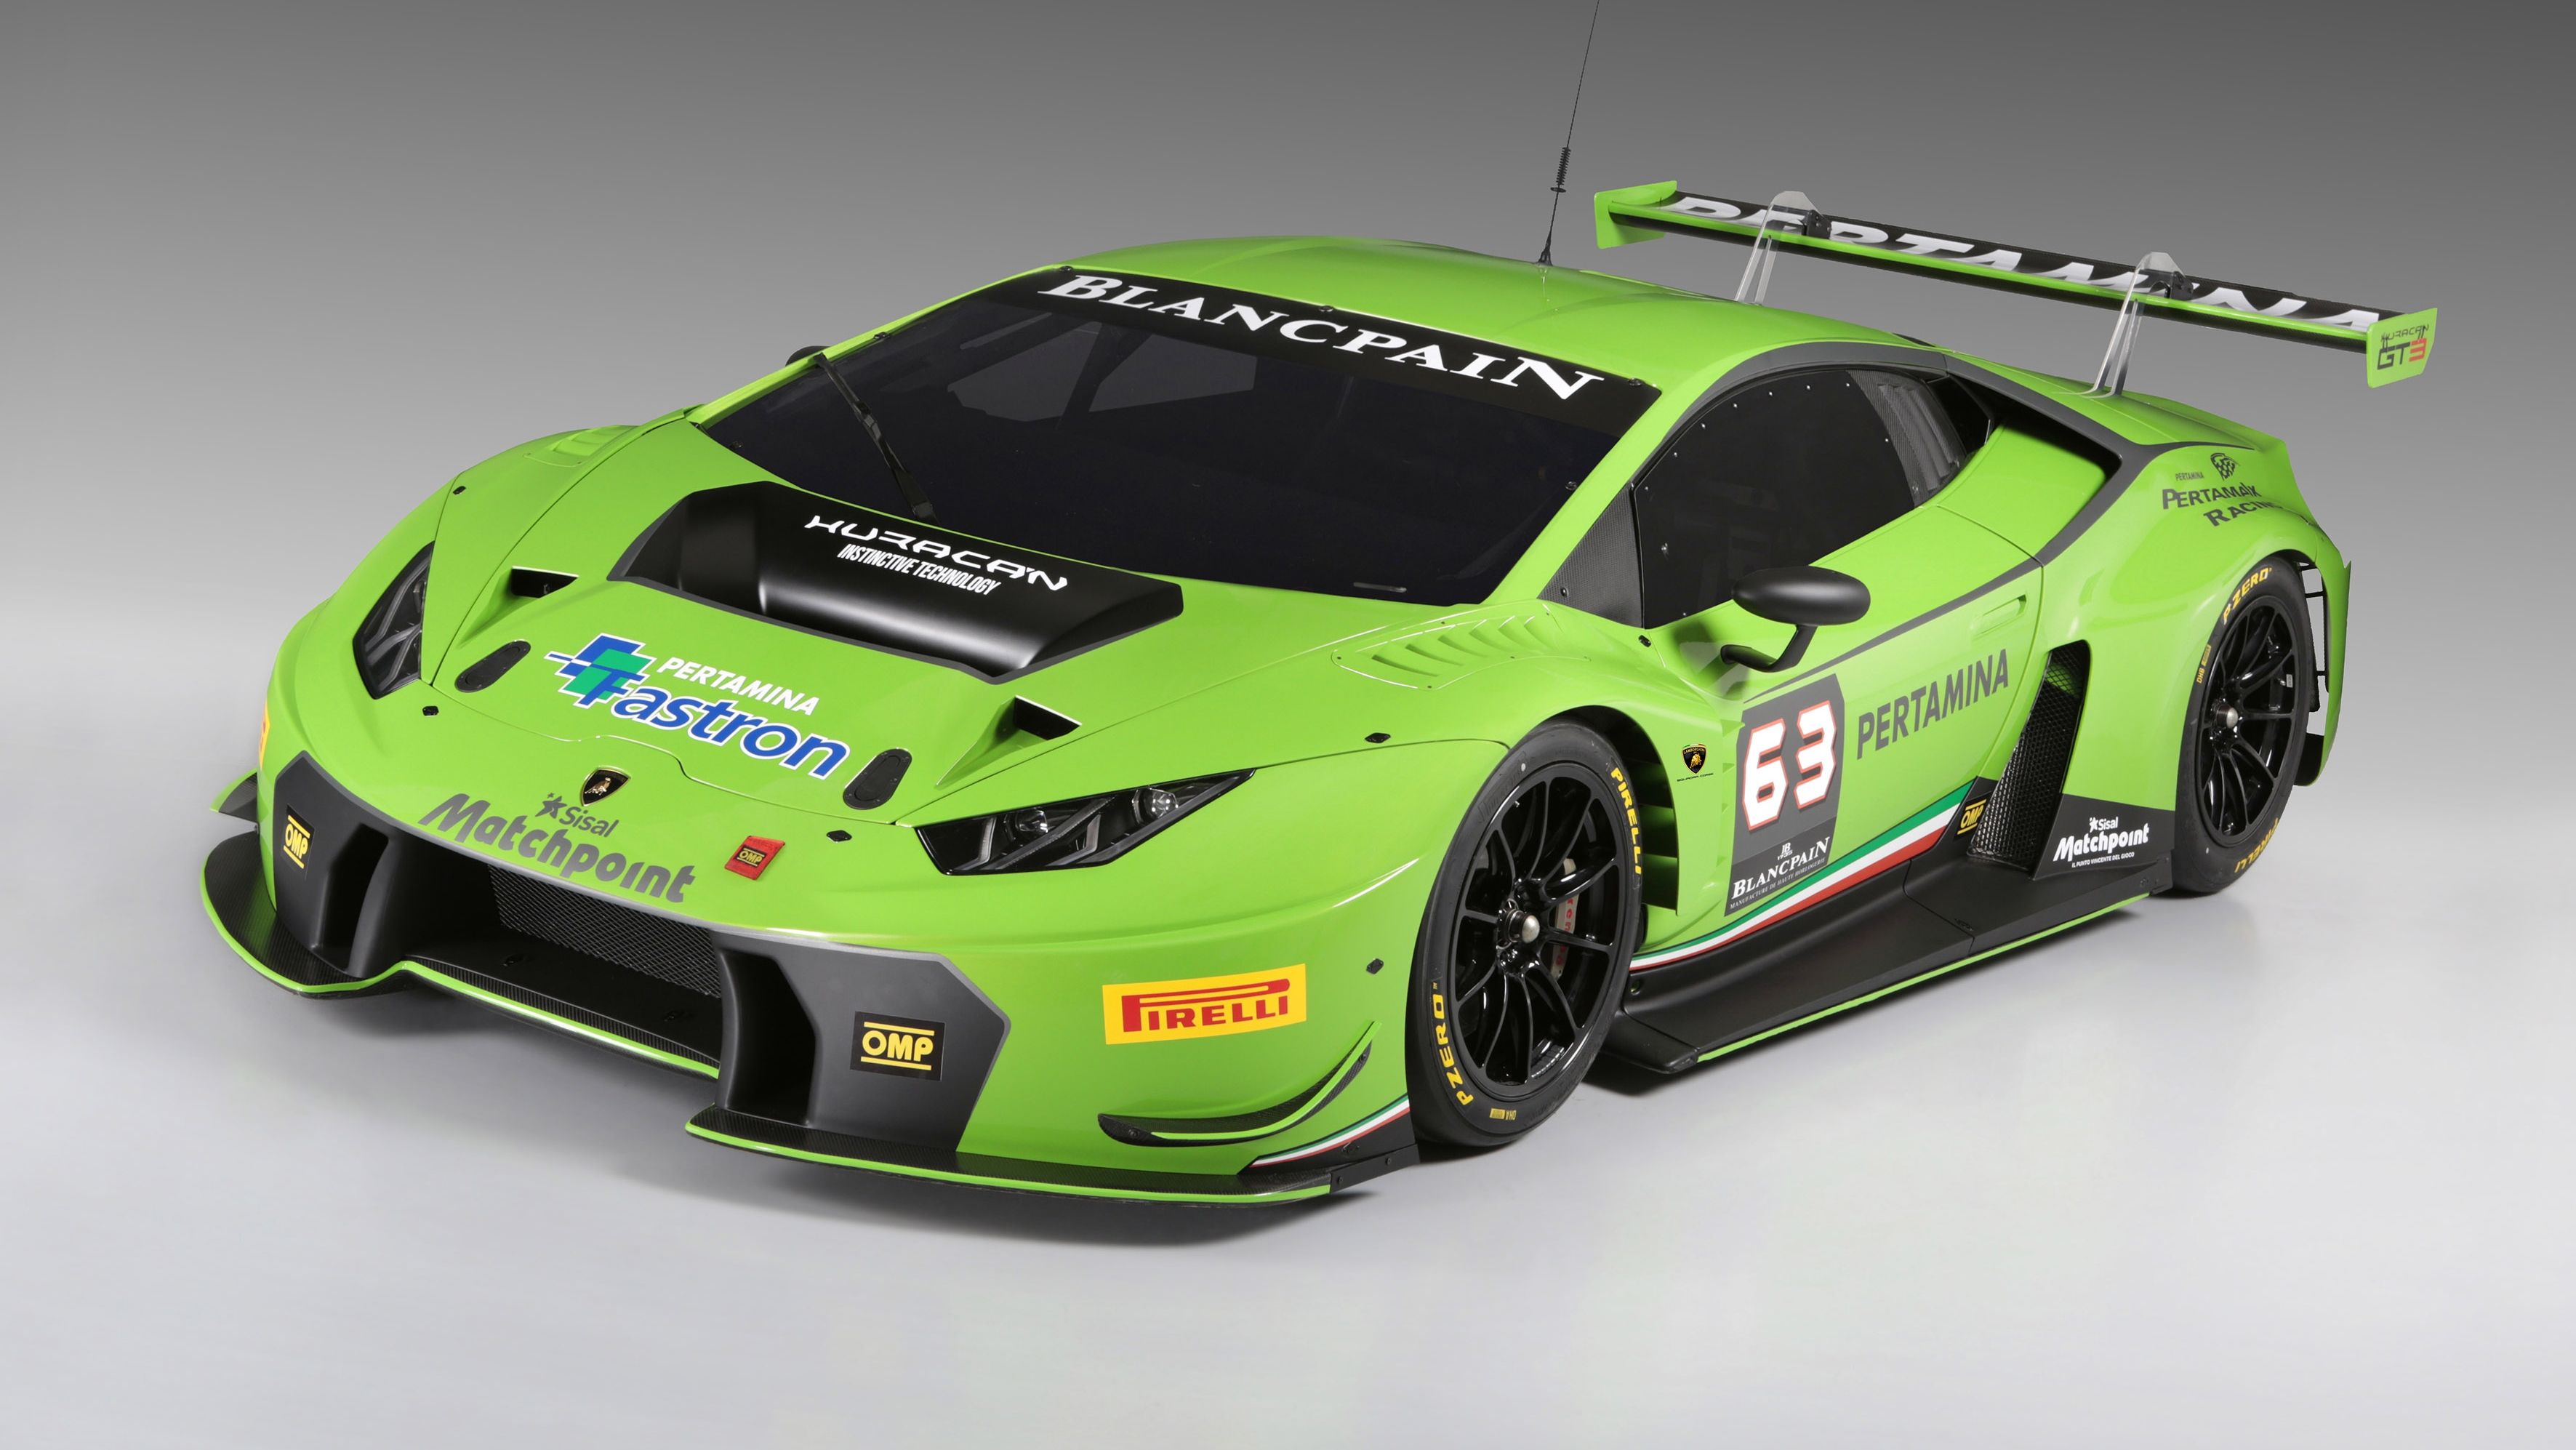  It took forever, but finally we get a look at Lambo's latest mean, green GT3-racing machine. It was well worth the wait!